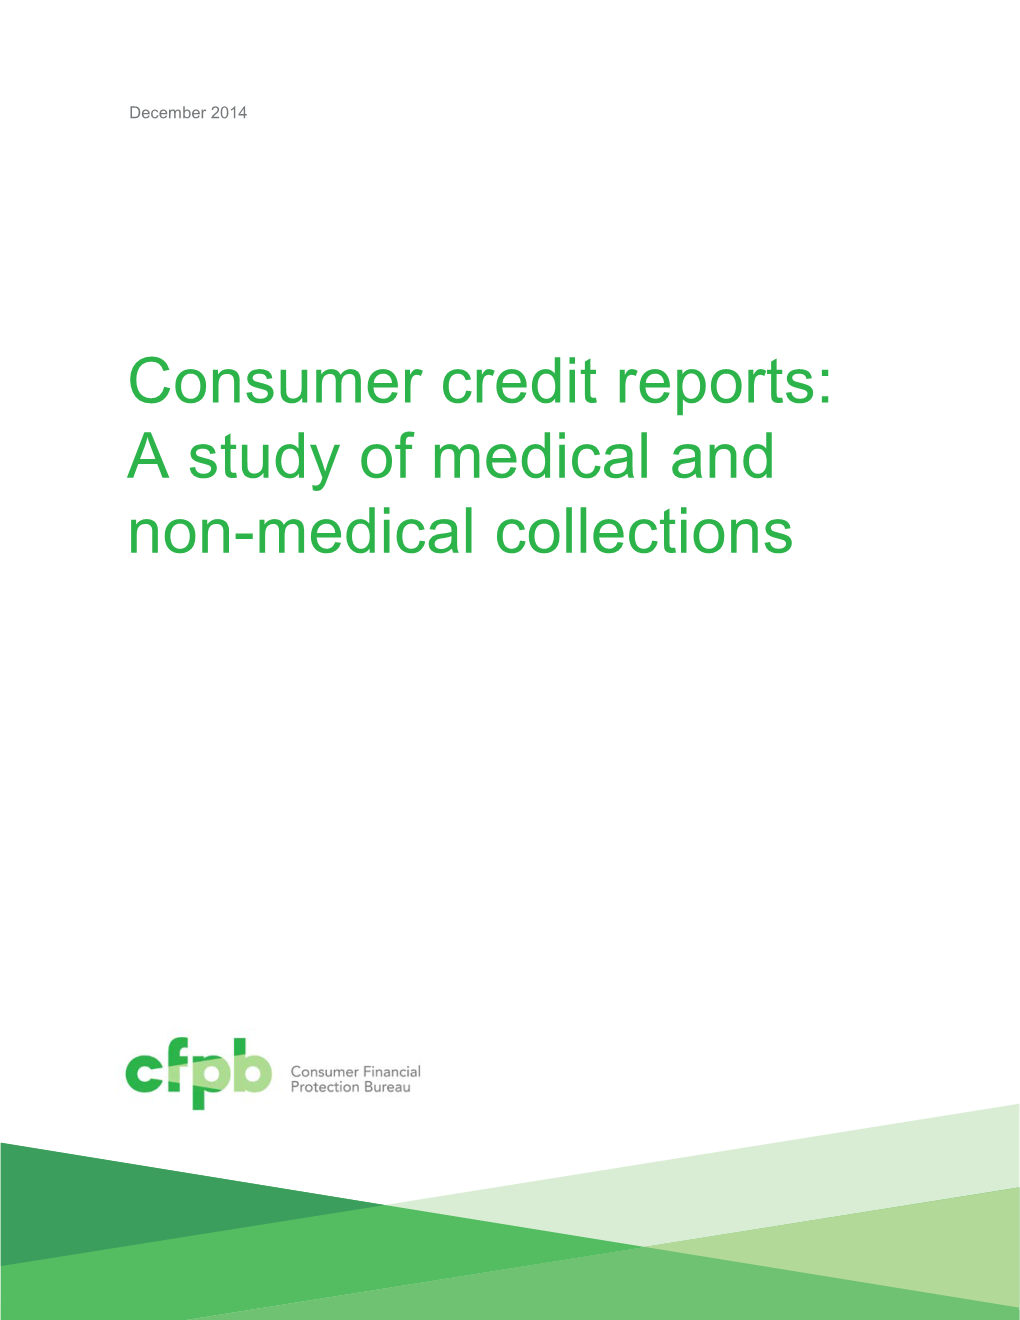 Consumer Credit Reports: a Study of Medical and Non-Medical Collections